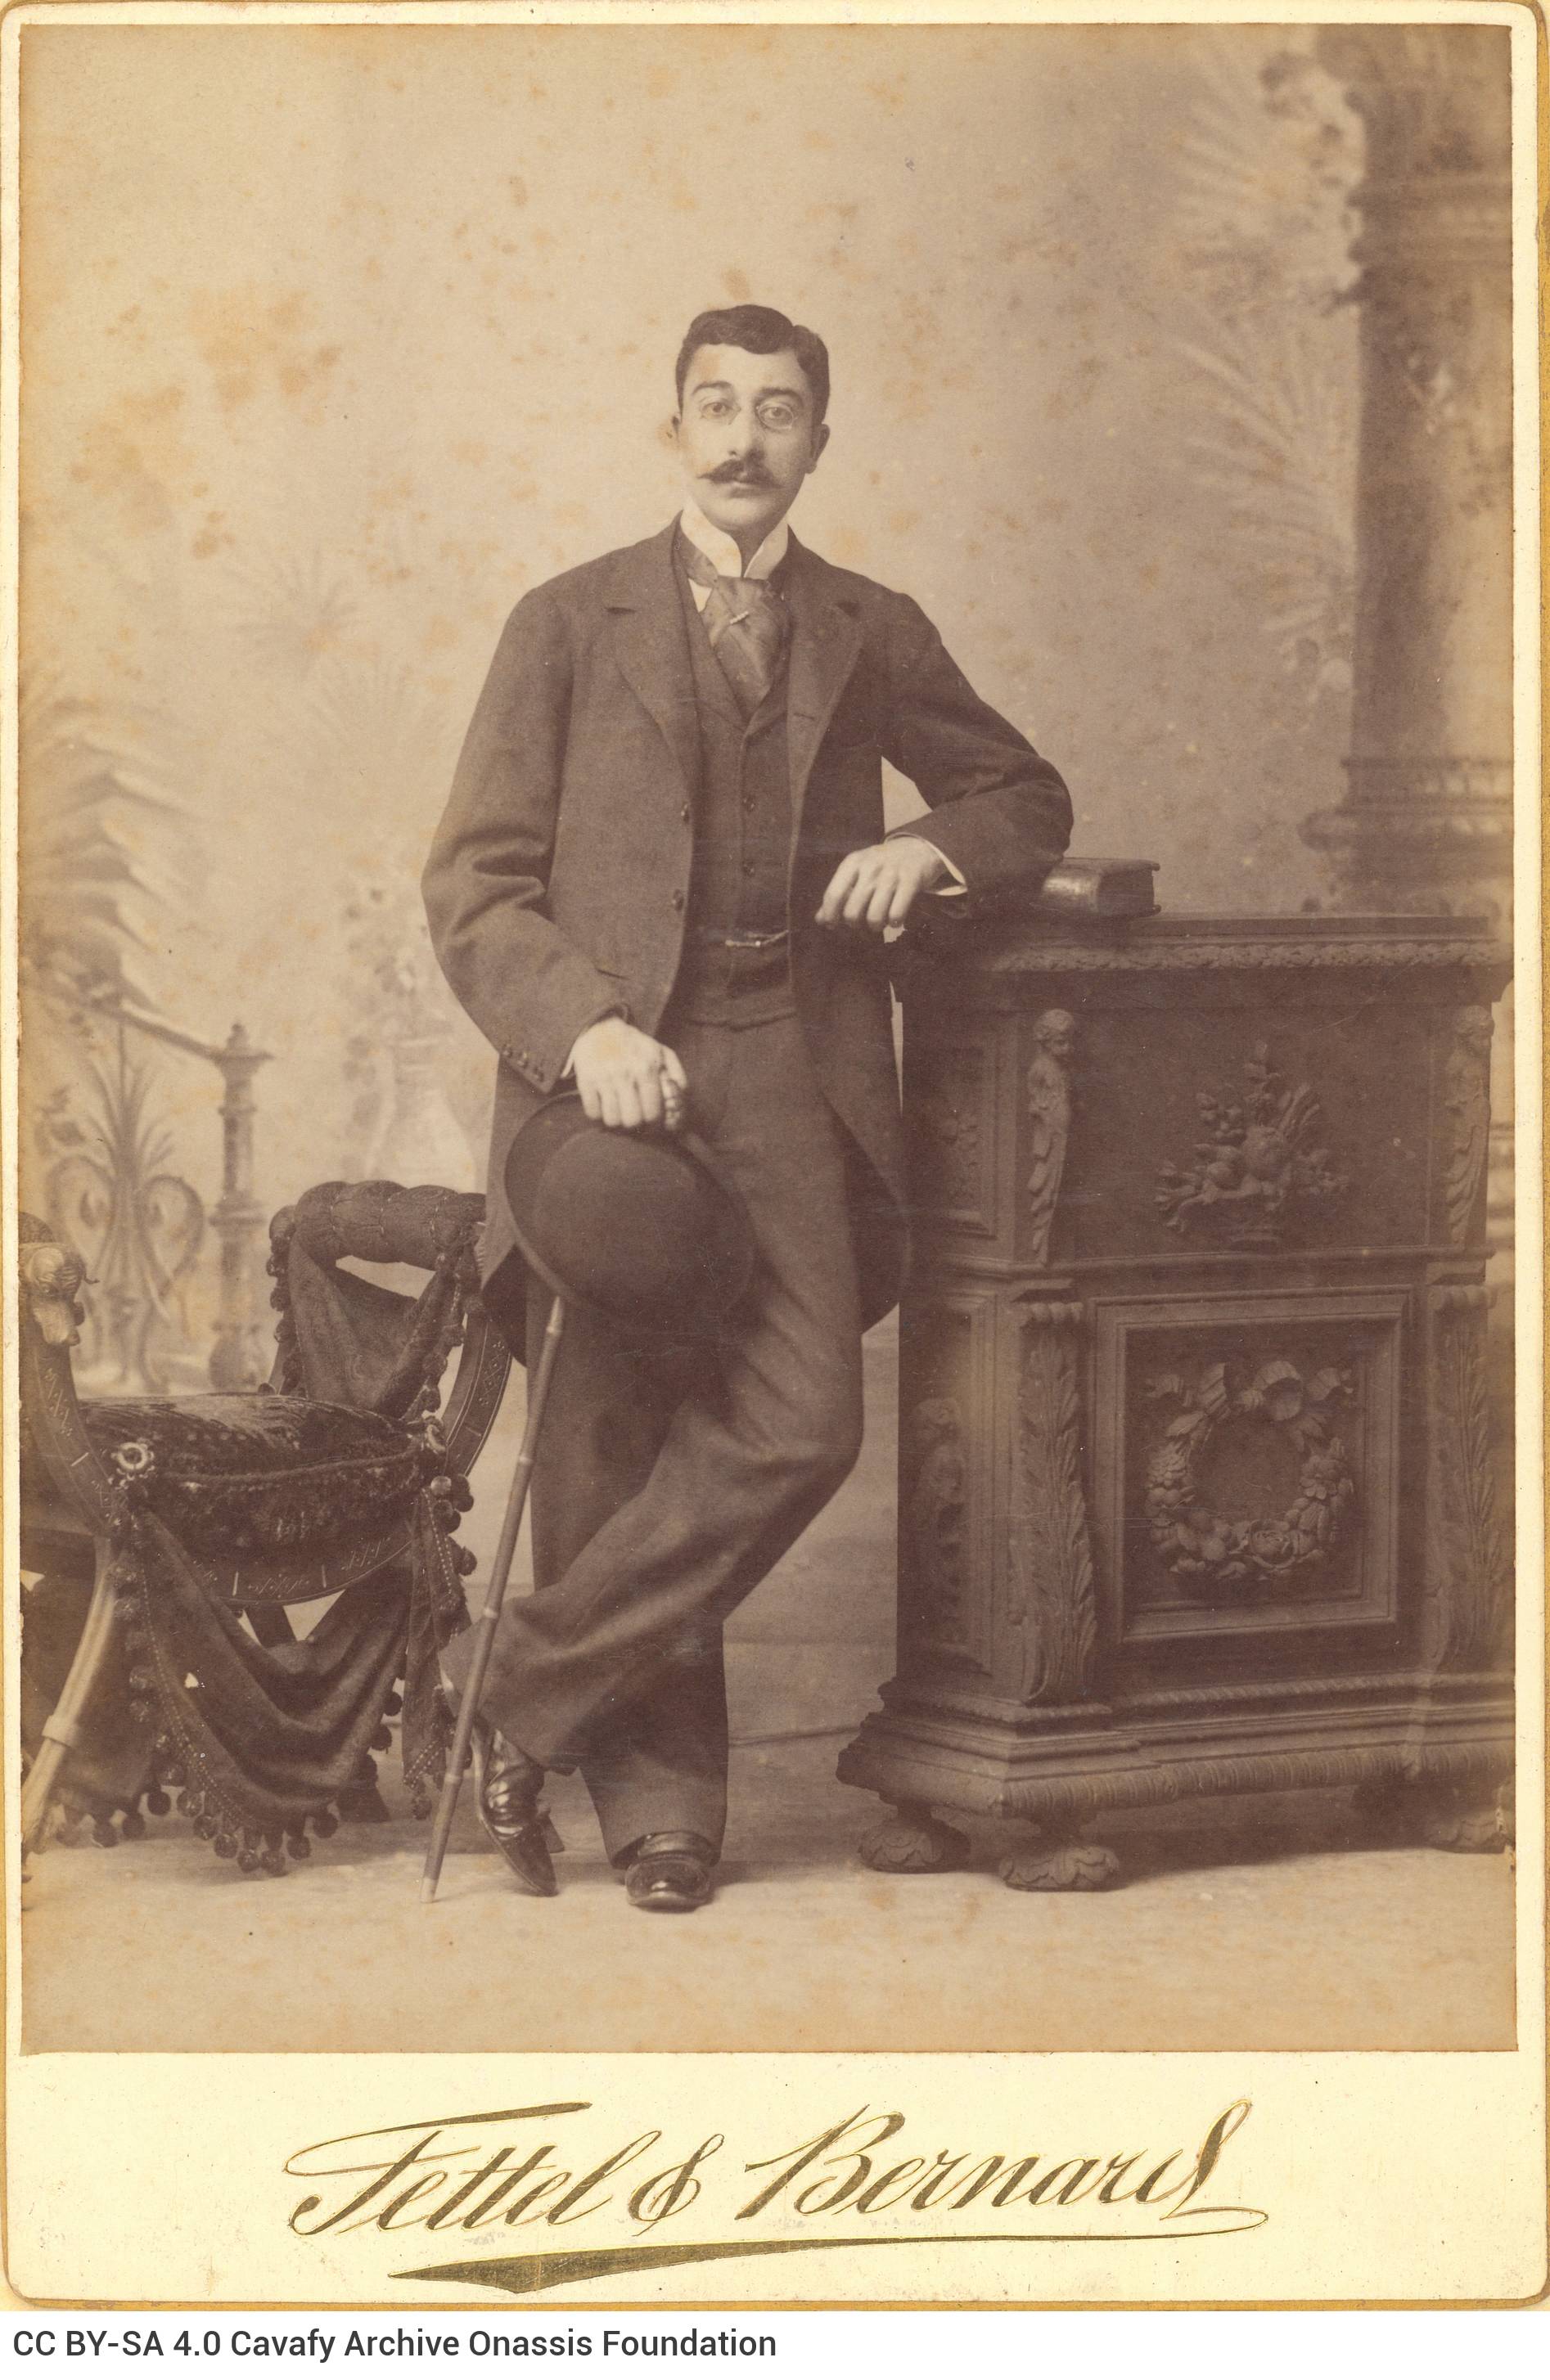 Undated photographic portrait of Cavafy by the photo shop of Fettel & Bernard in Alexandria. The poet has a mustache, he wear